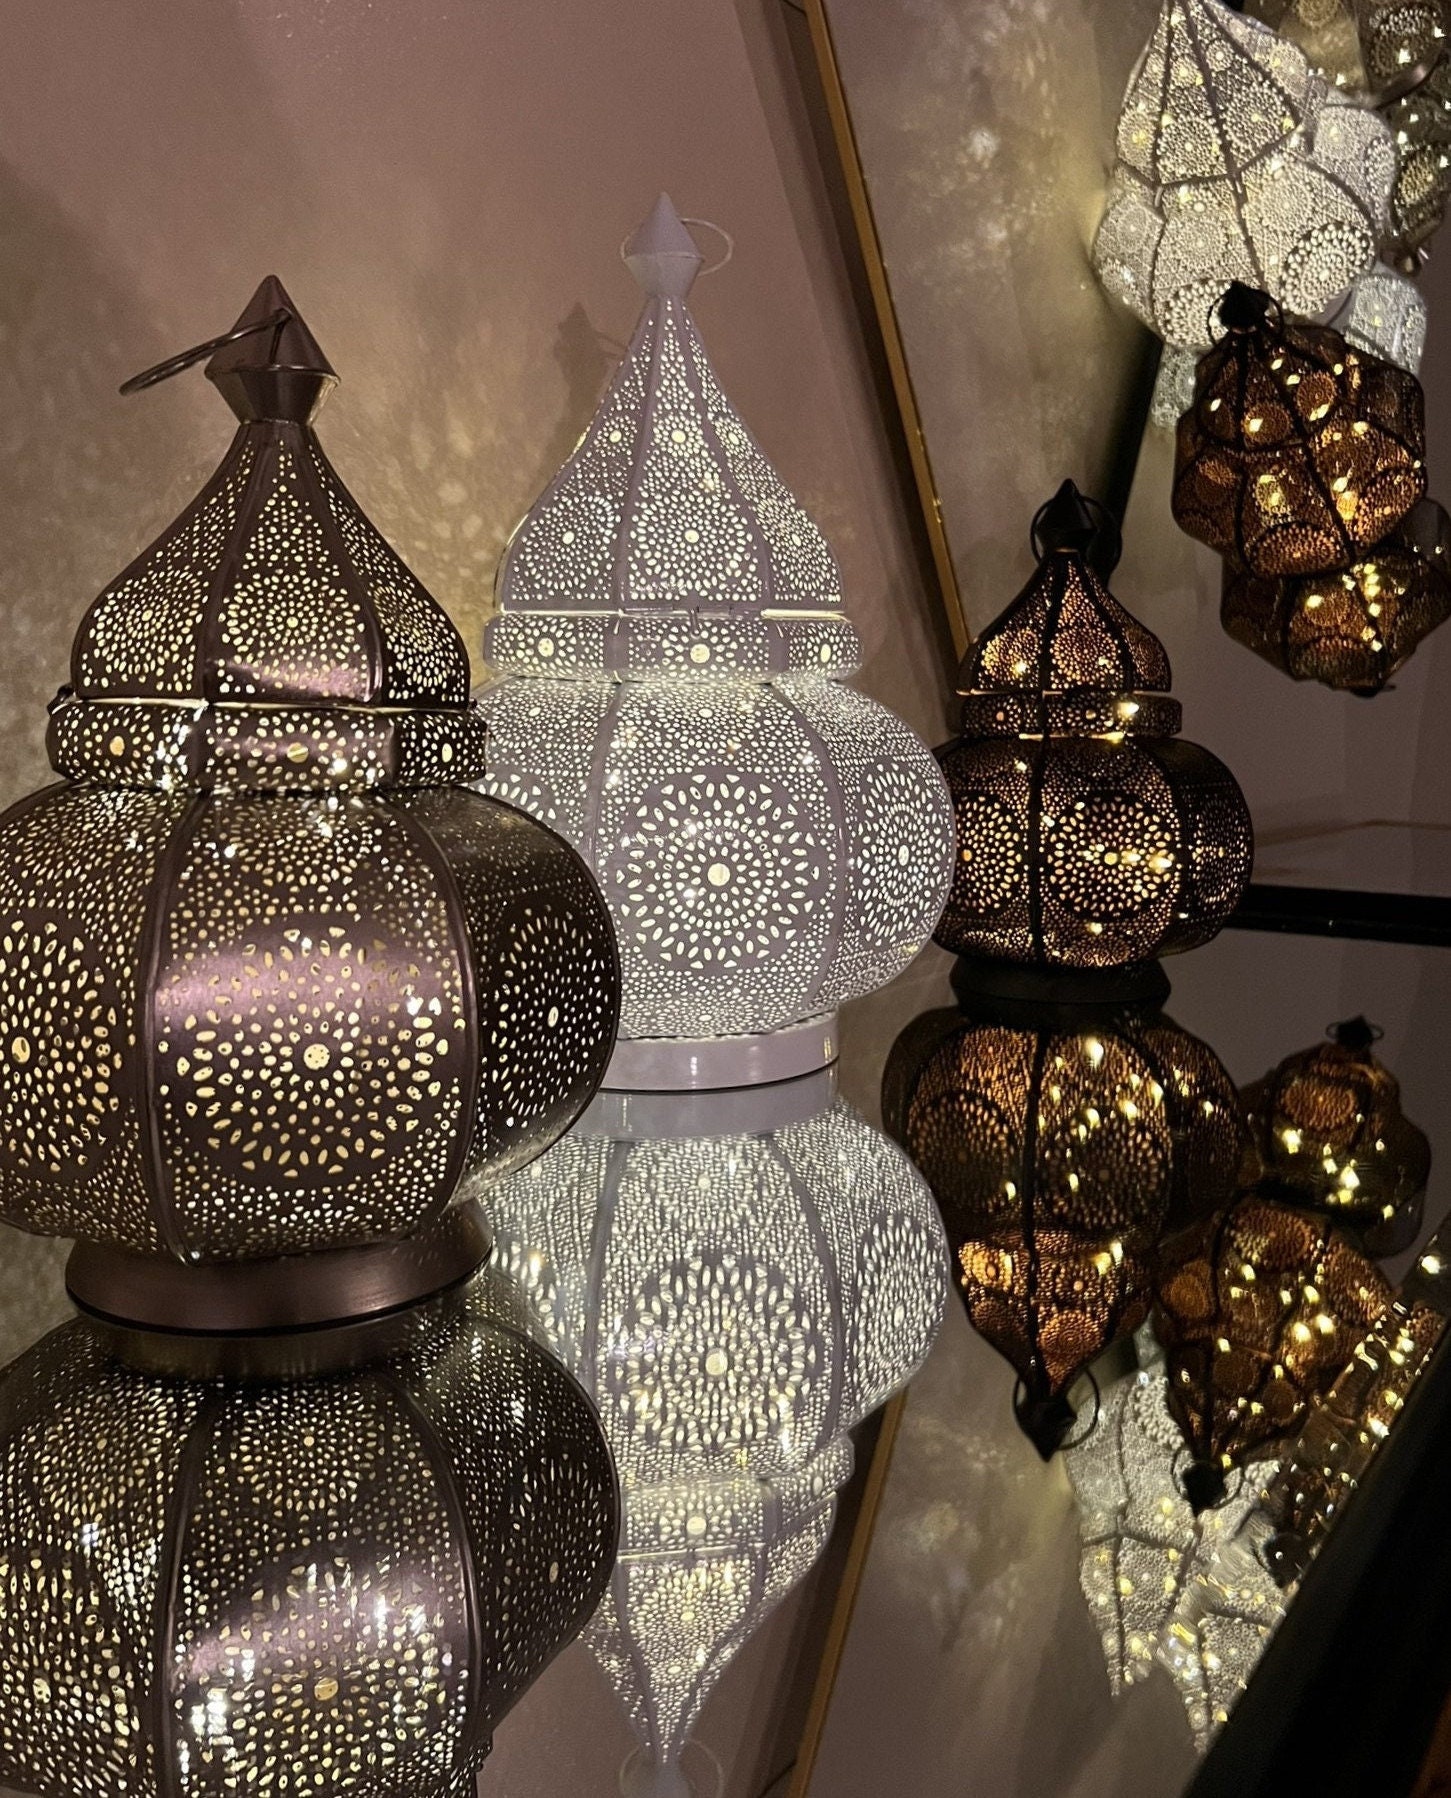 Lamplust Moroccan Lantern Decorative, 17 inch Large Lantern for Home Decor, Black and Gold Moroccan Decor, LED Fairy Lights Included, Star Candle